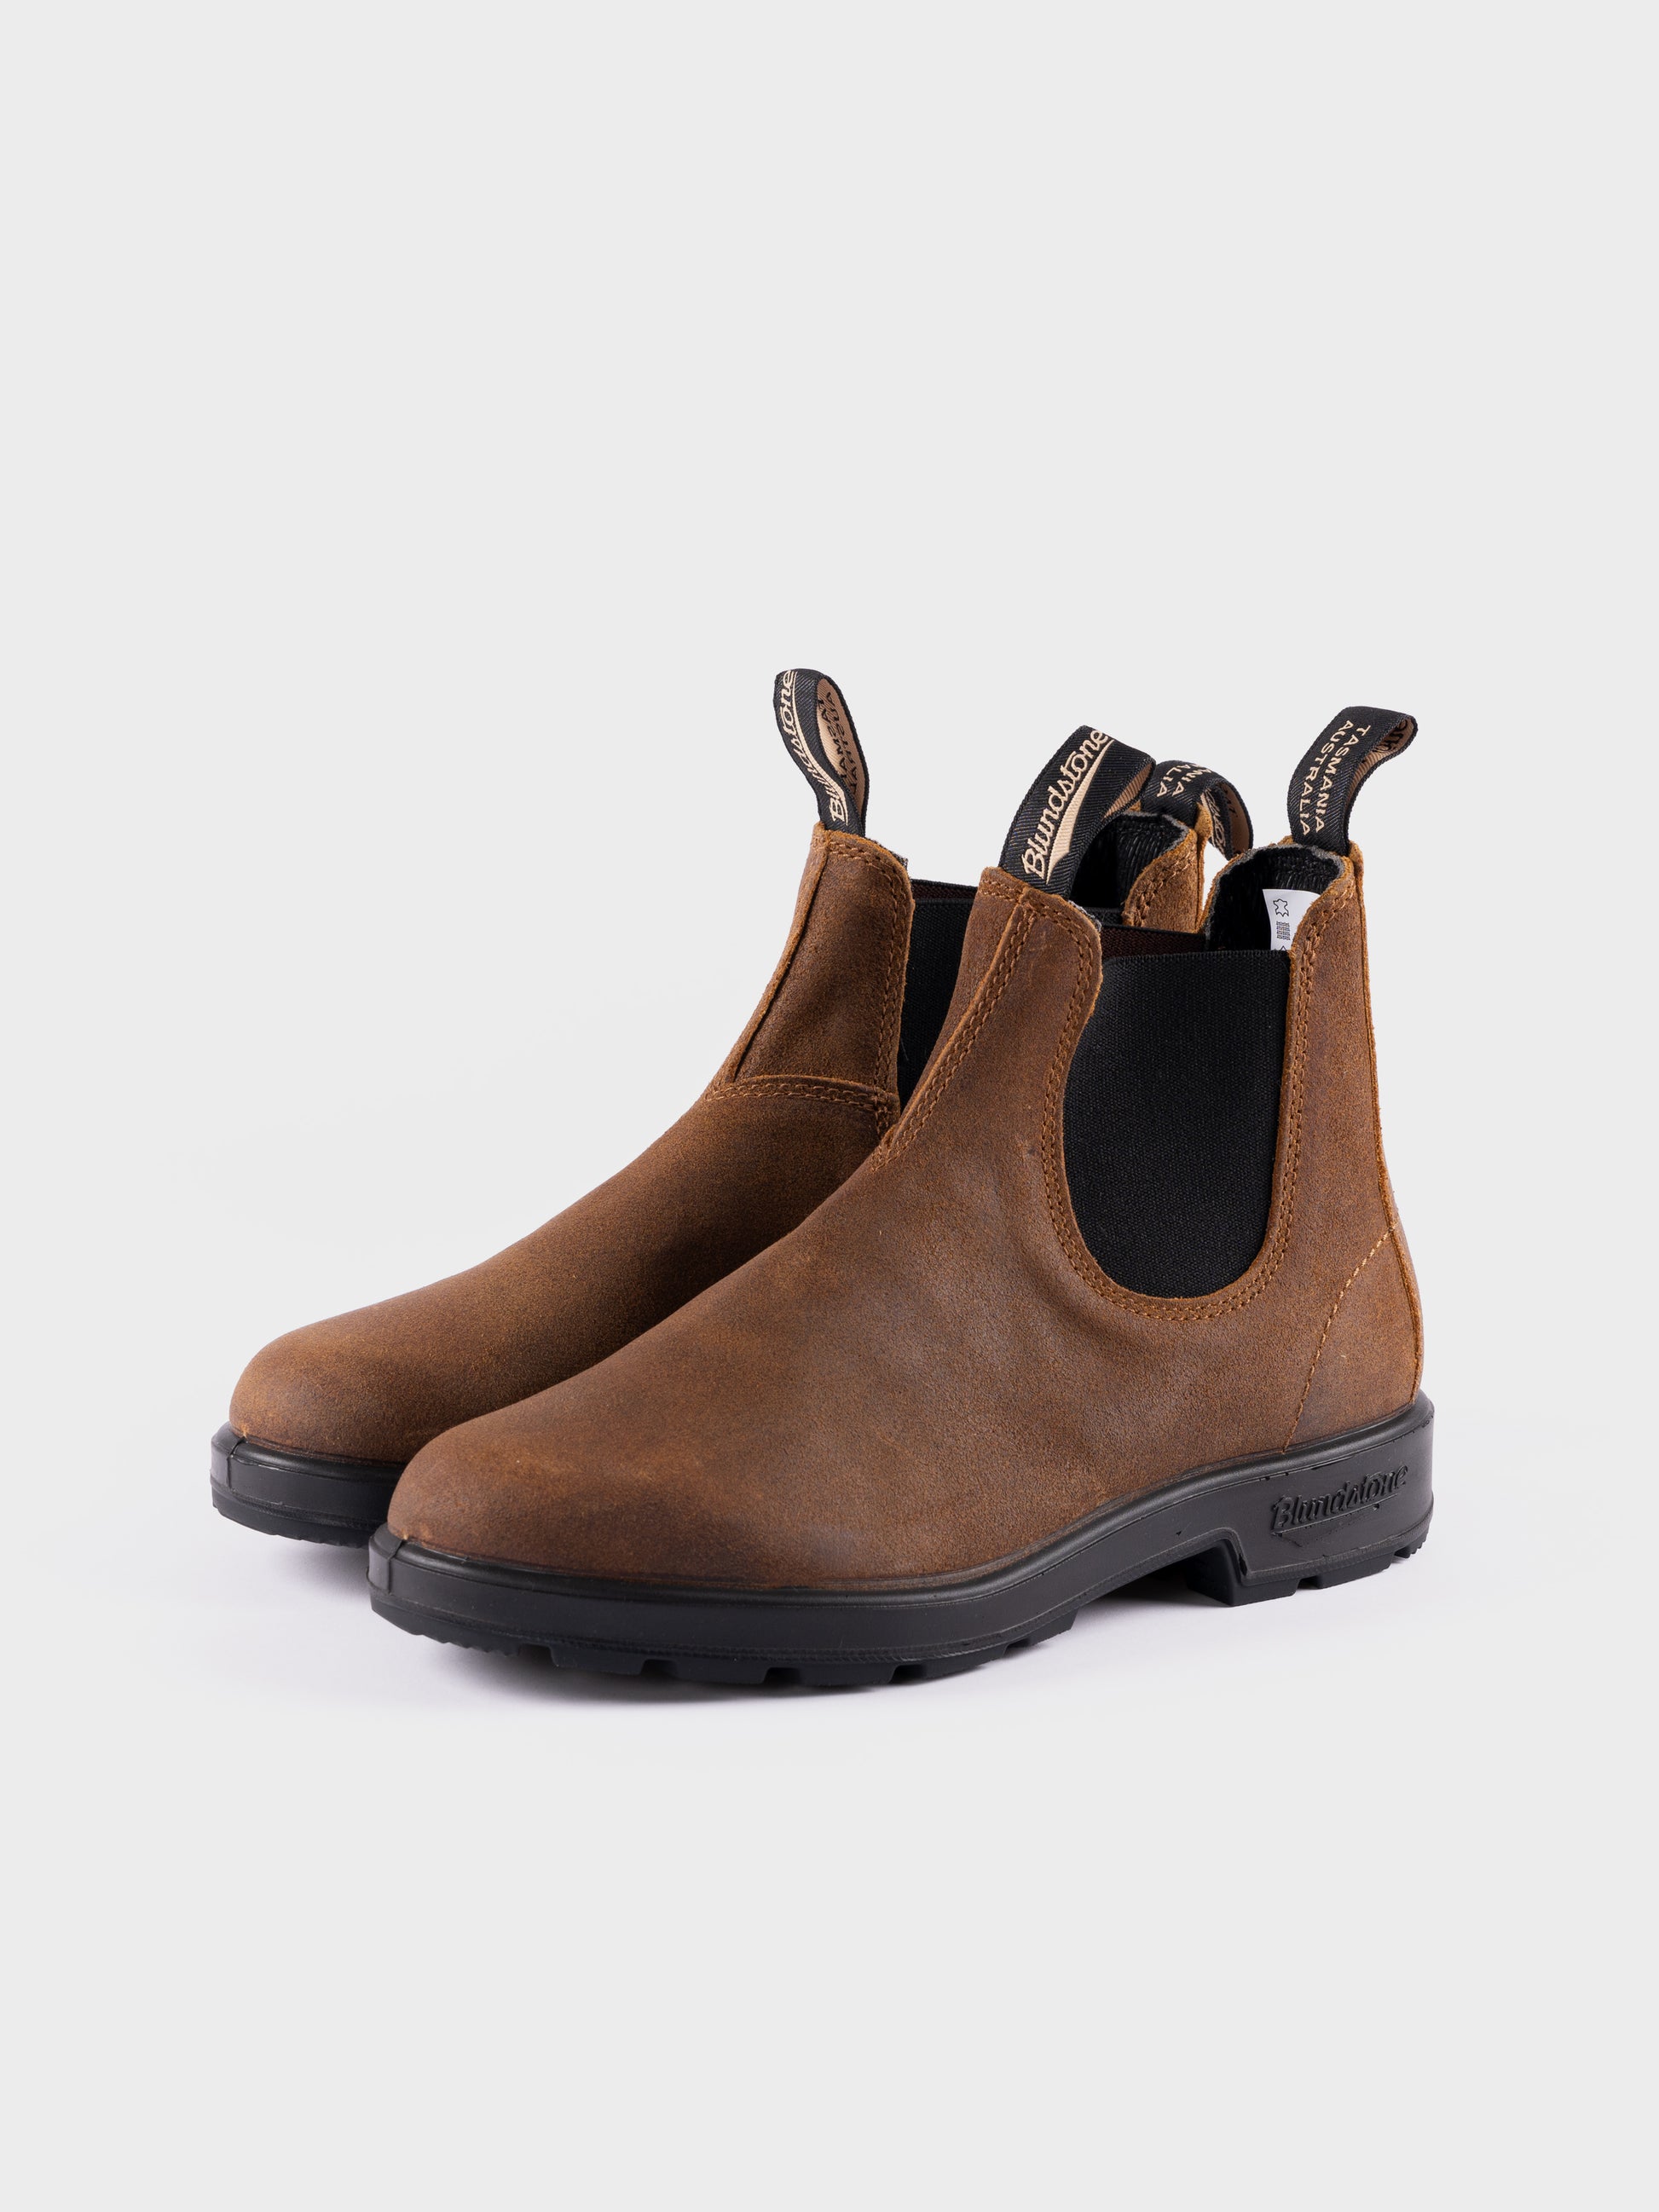 Blundstone Boots - 1911 Tobacco Leather